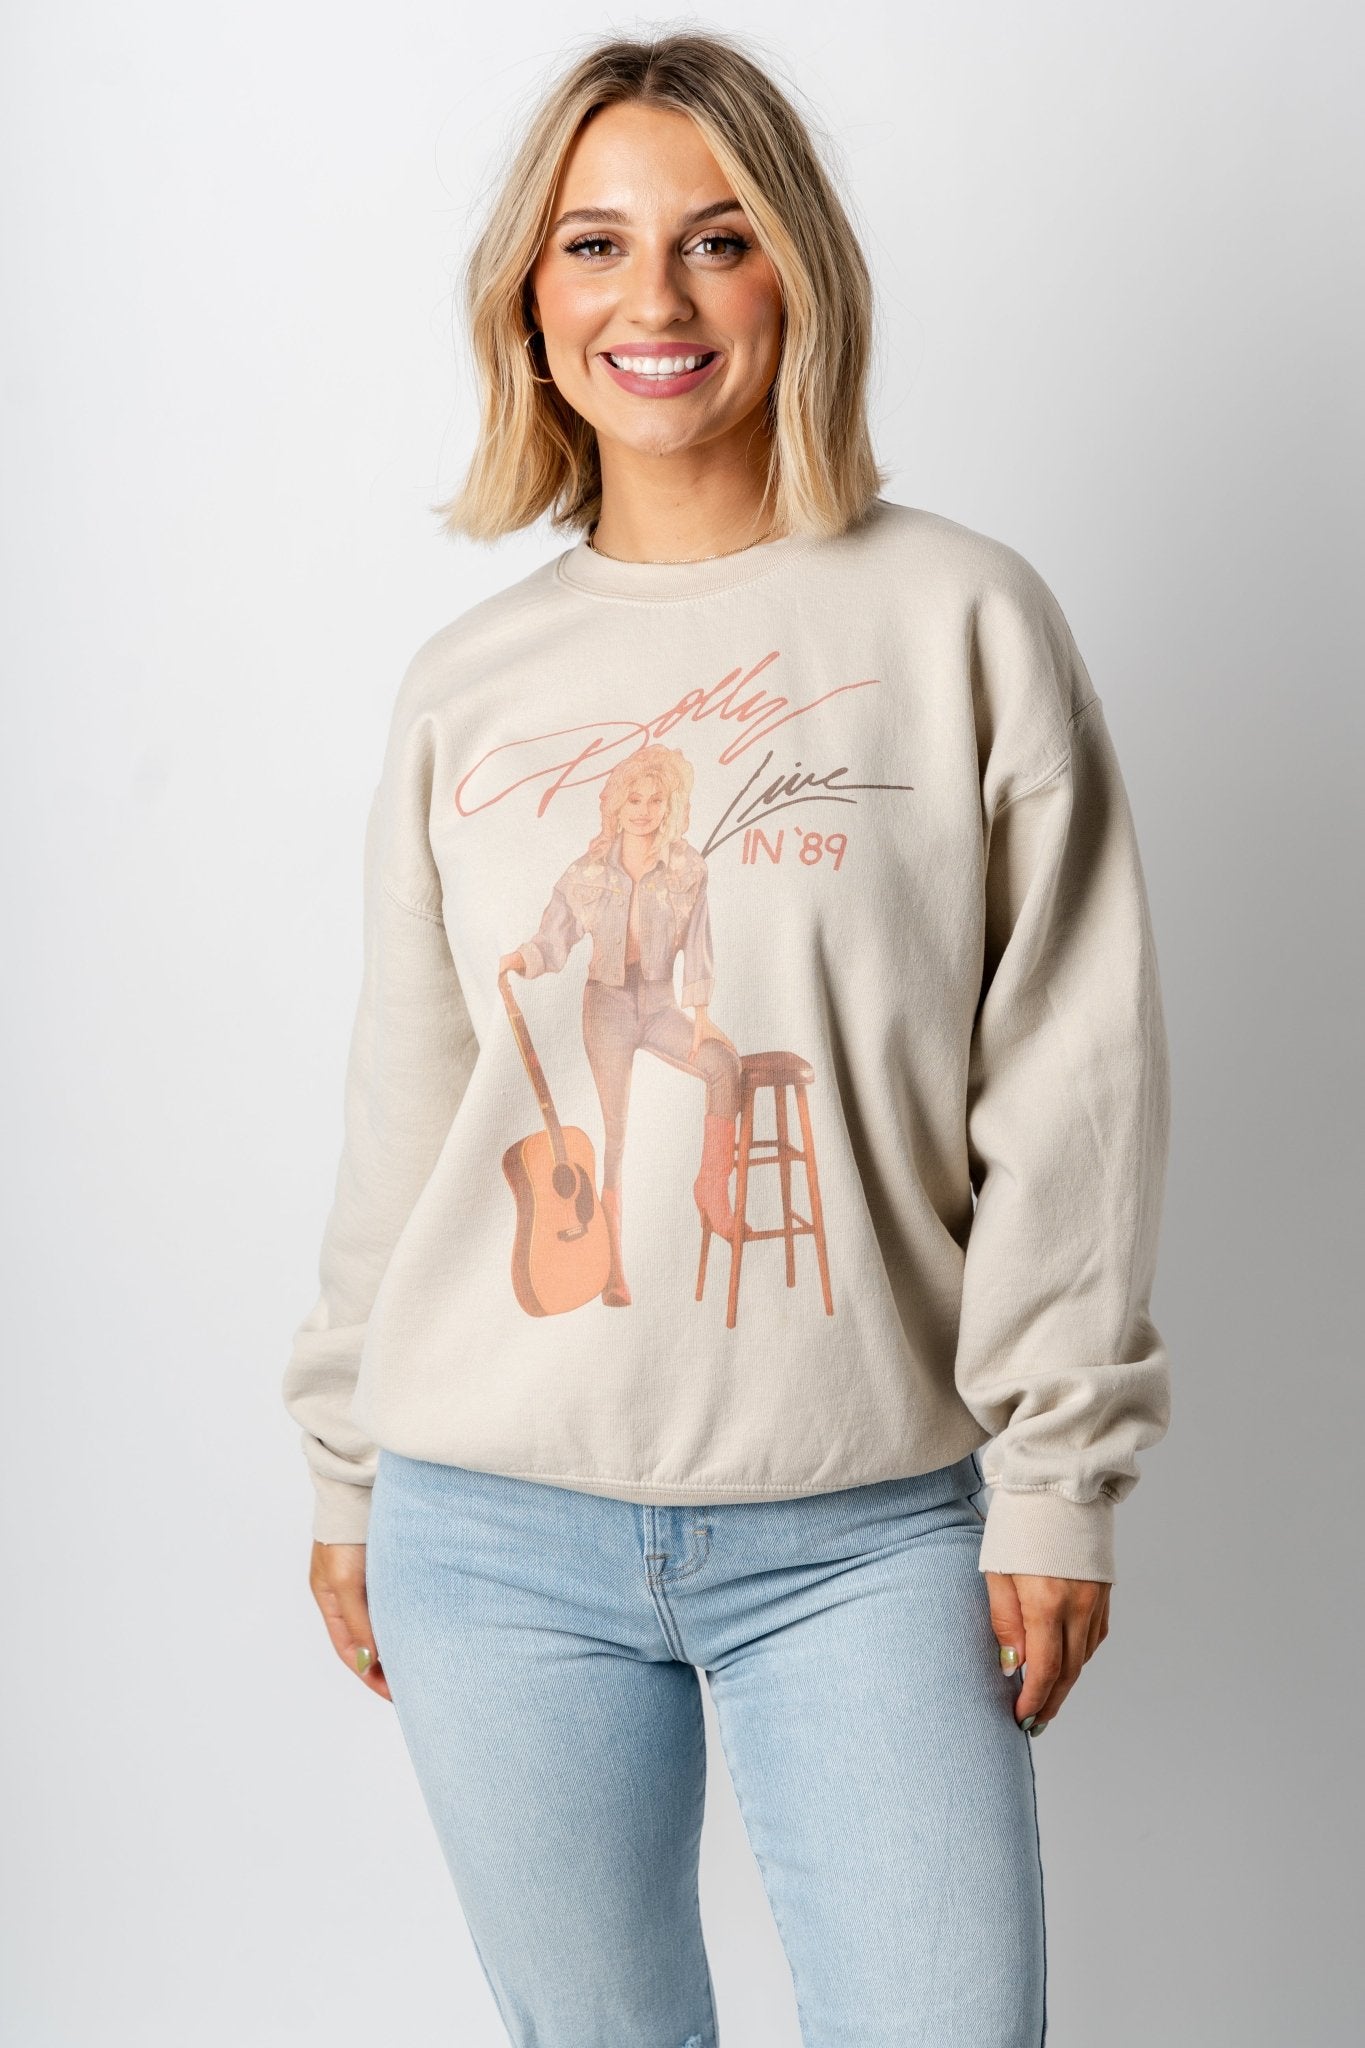 Dolly Parton Live 89 thrifted sweatshirt sand